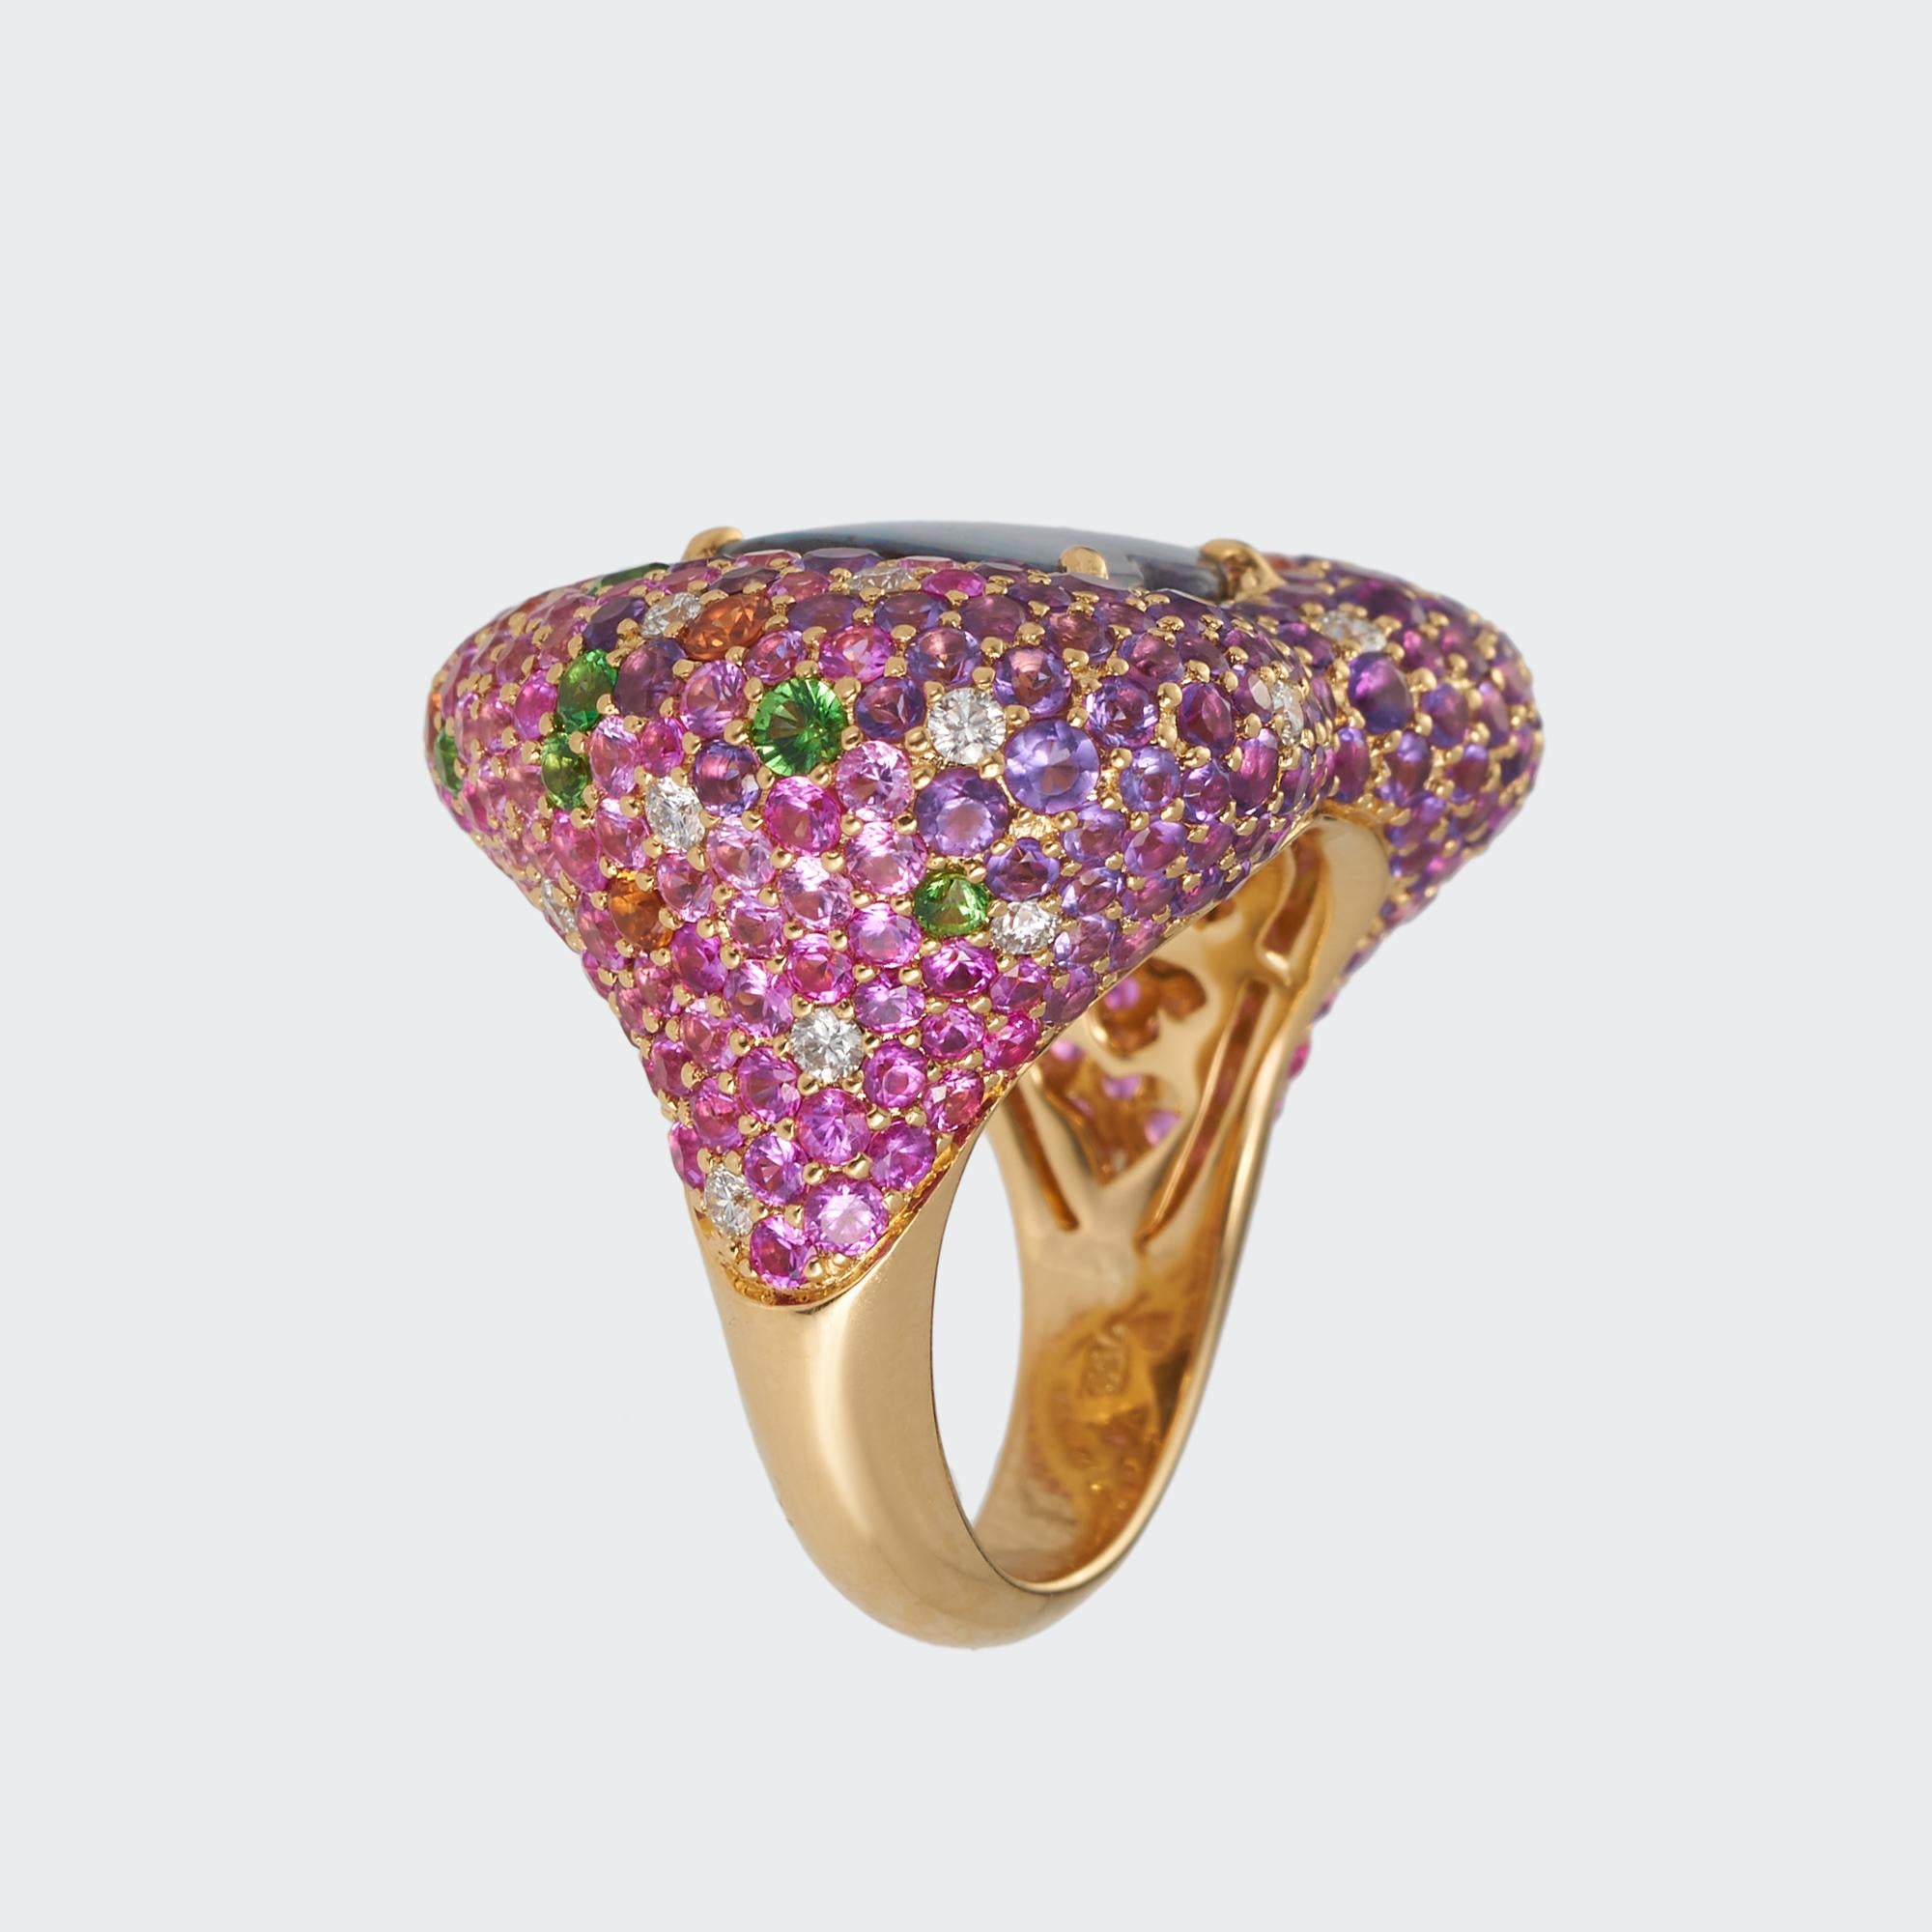 Margot McKinney 18karat Yellow Gold Opal Ring, featuring a 6.01ct heart shape Natural Queensland Boulder Opal, surrounded by diamonds 0.50ct, pink sapphires 4.19cts, orange sapphires 0.51ct, tsavorites 0.63ct and amethysts 2.88ct.